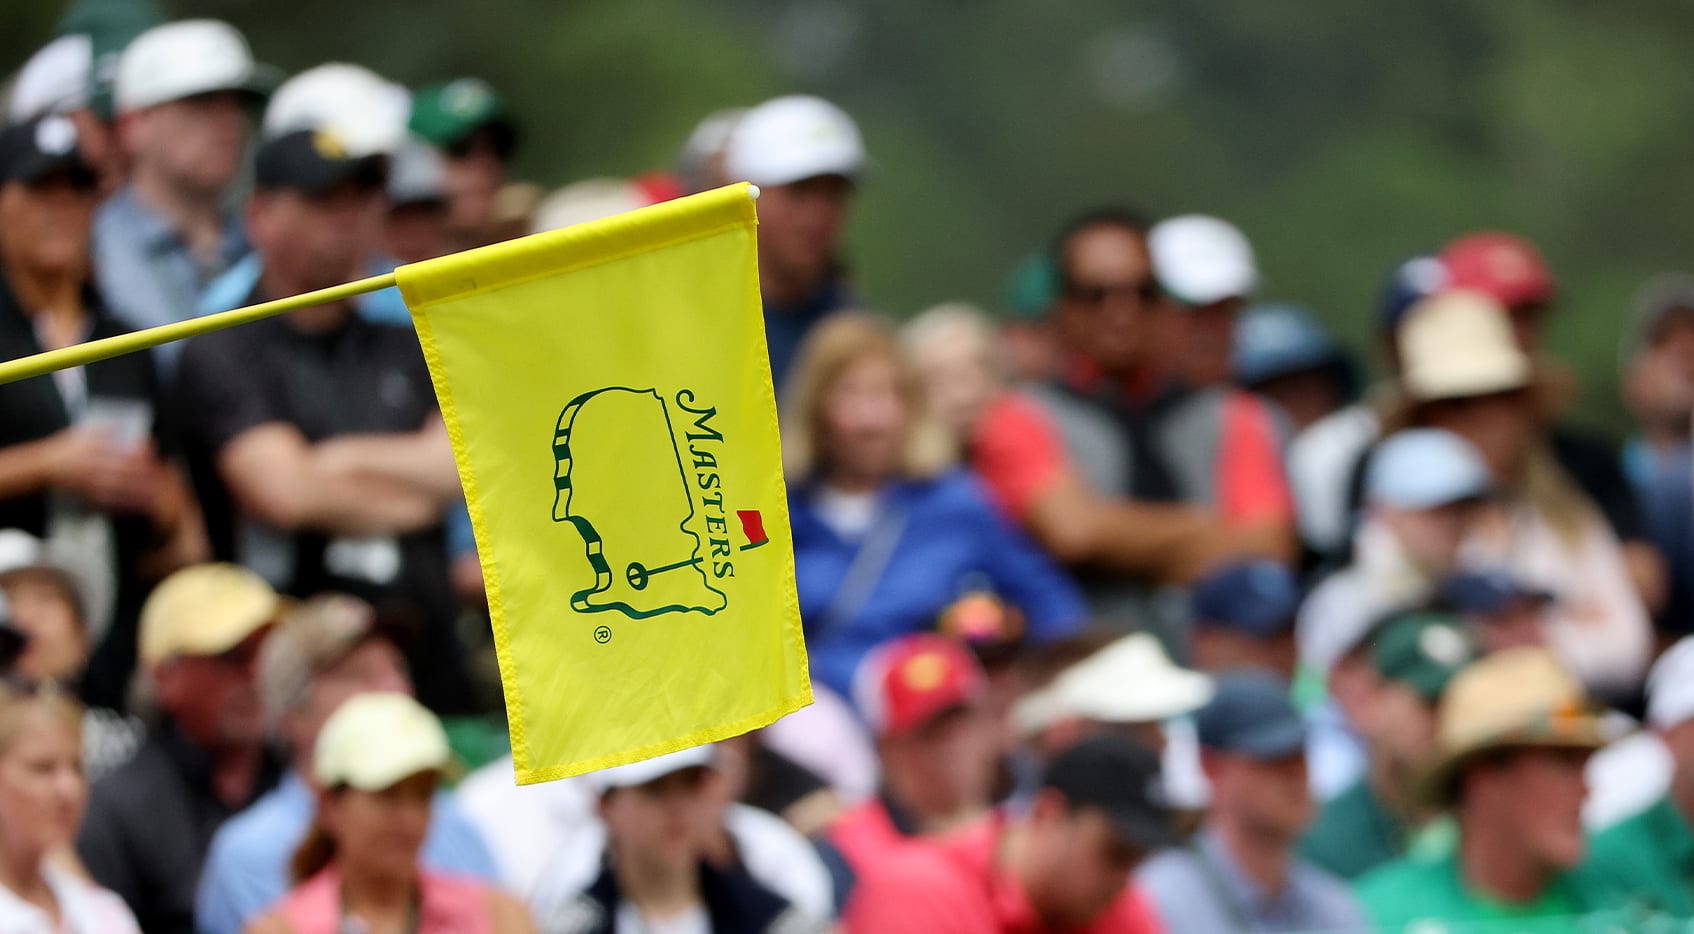 When is the Masters Tournament?